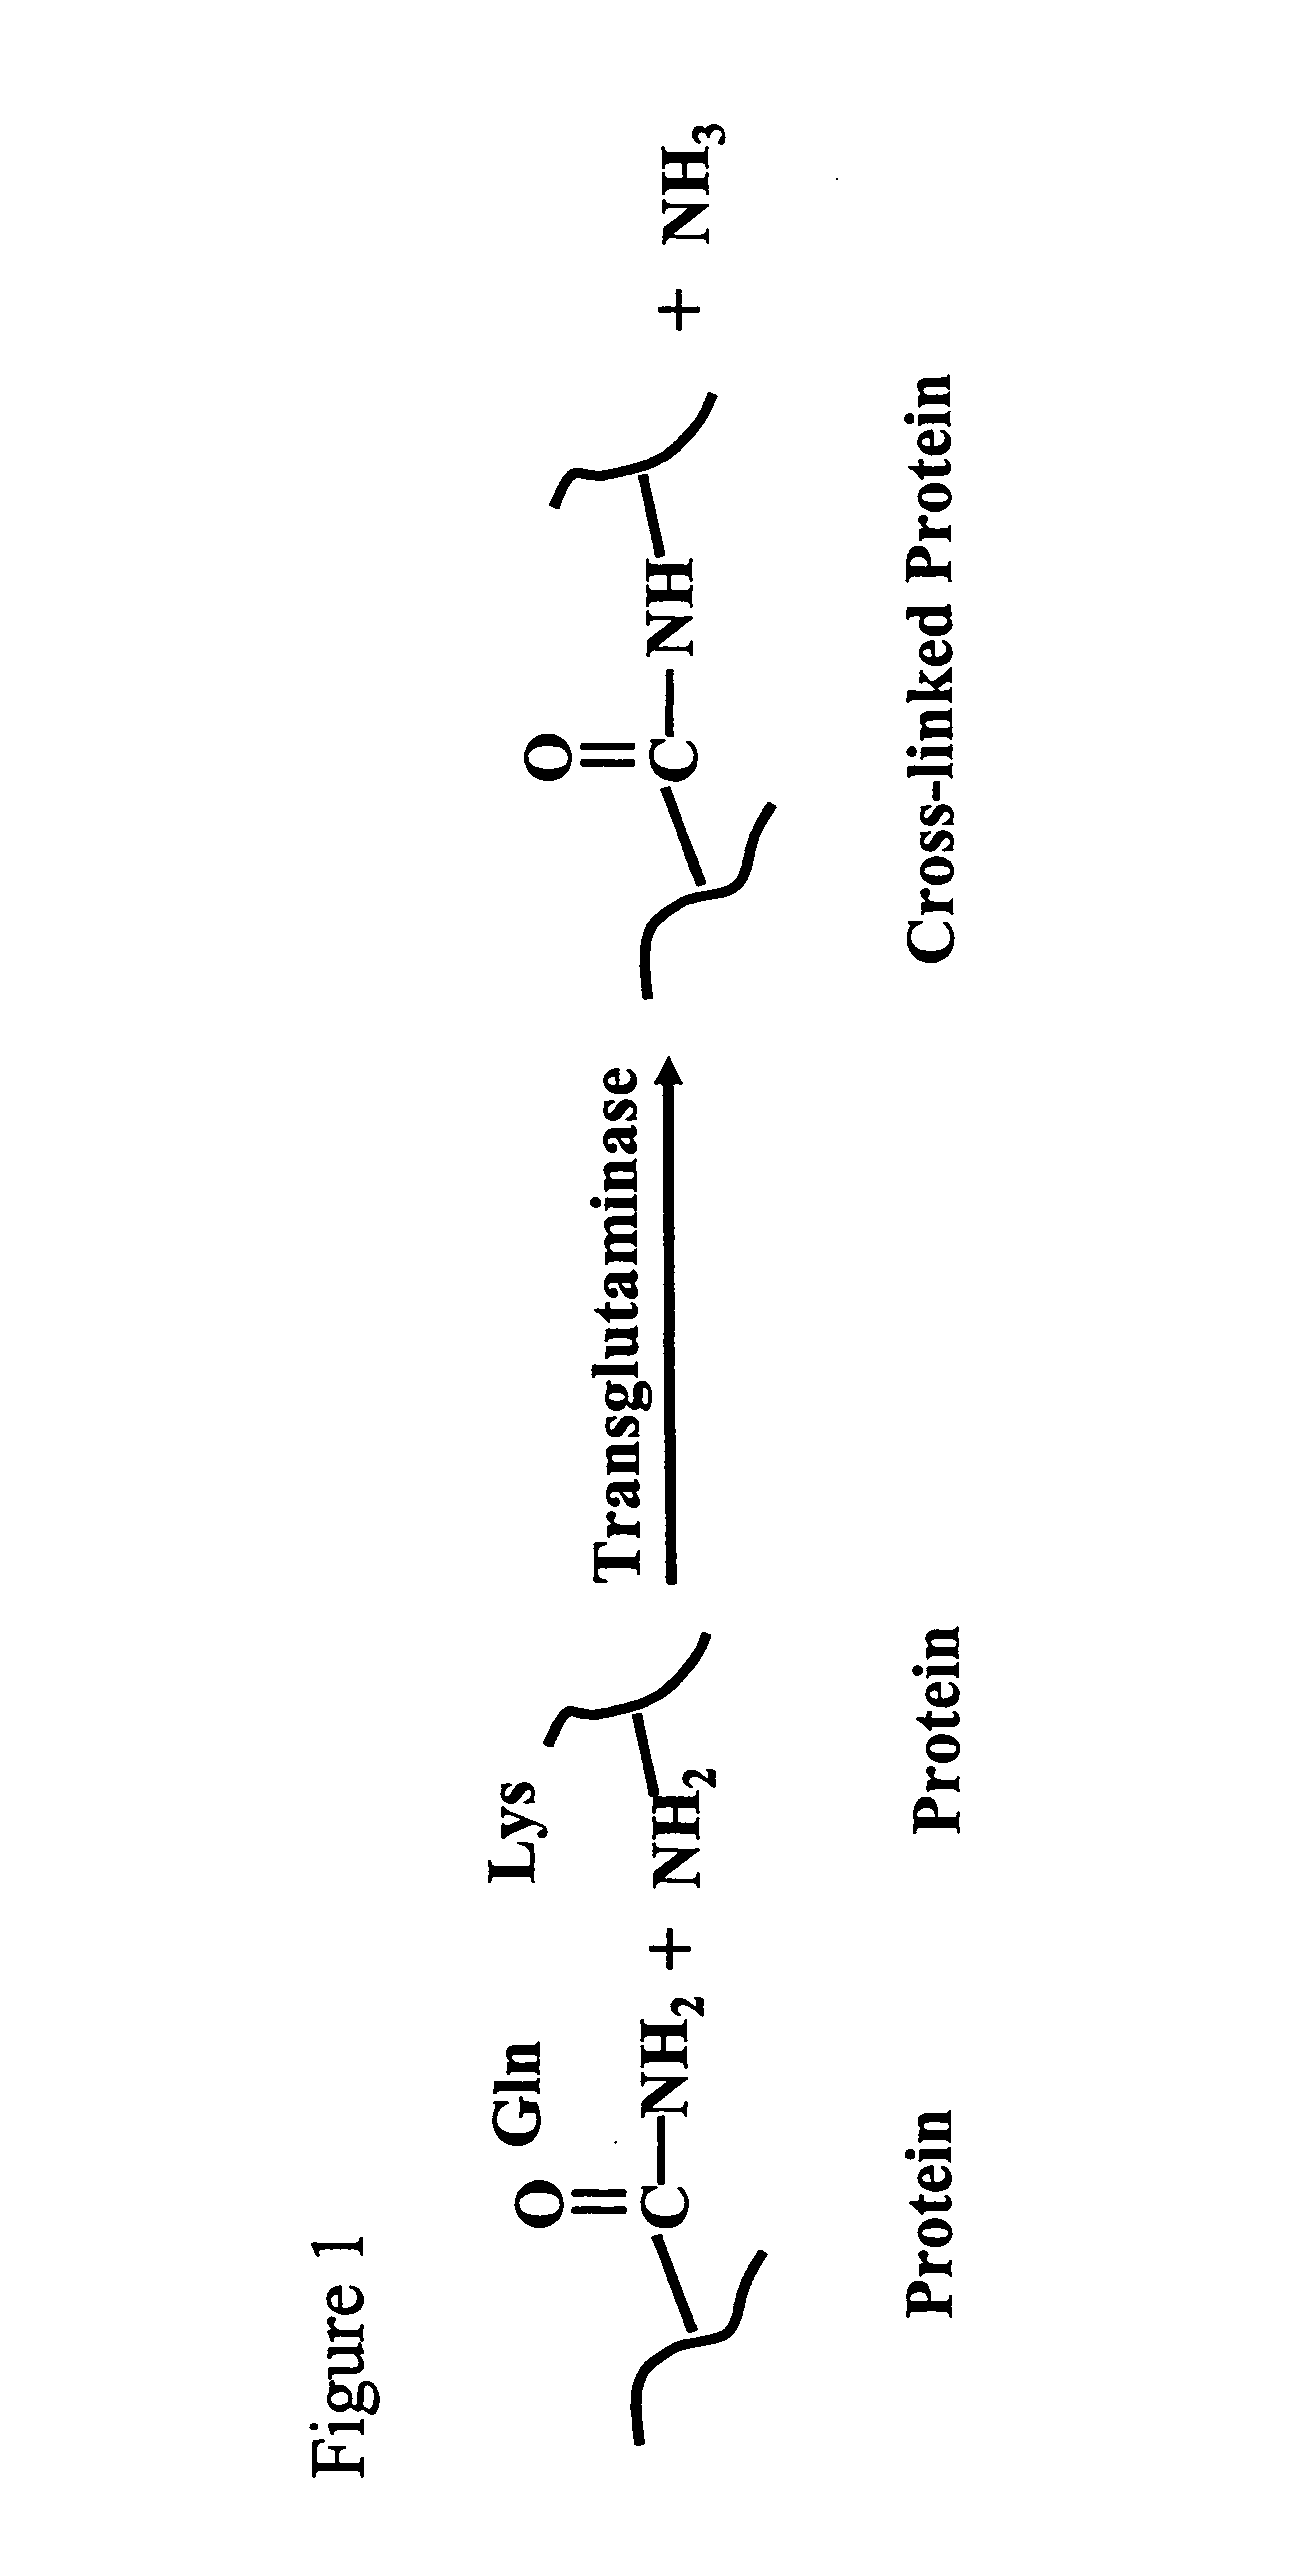 Polysaccharide-based polymers and methods of making the same